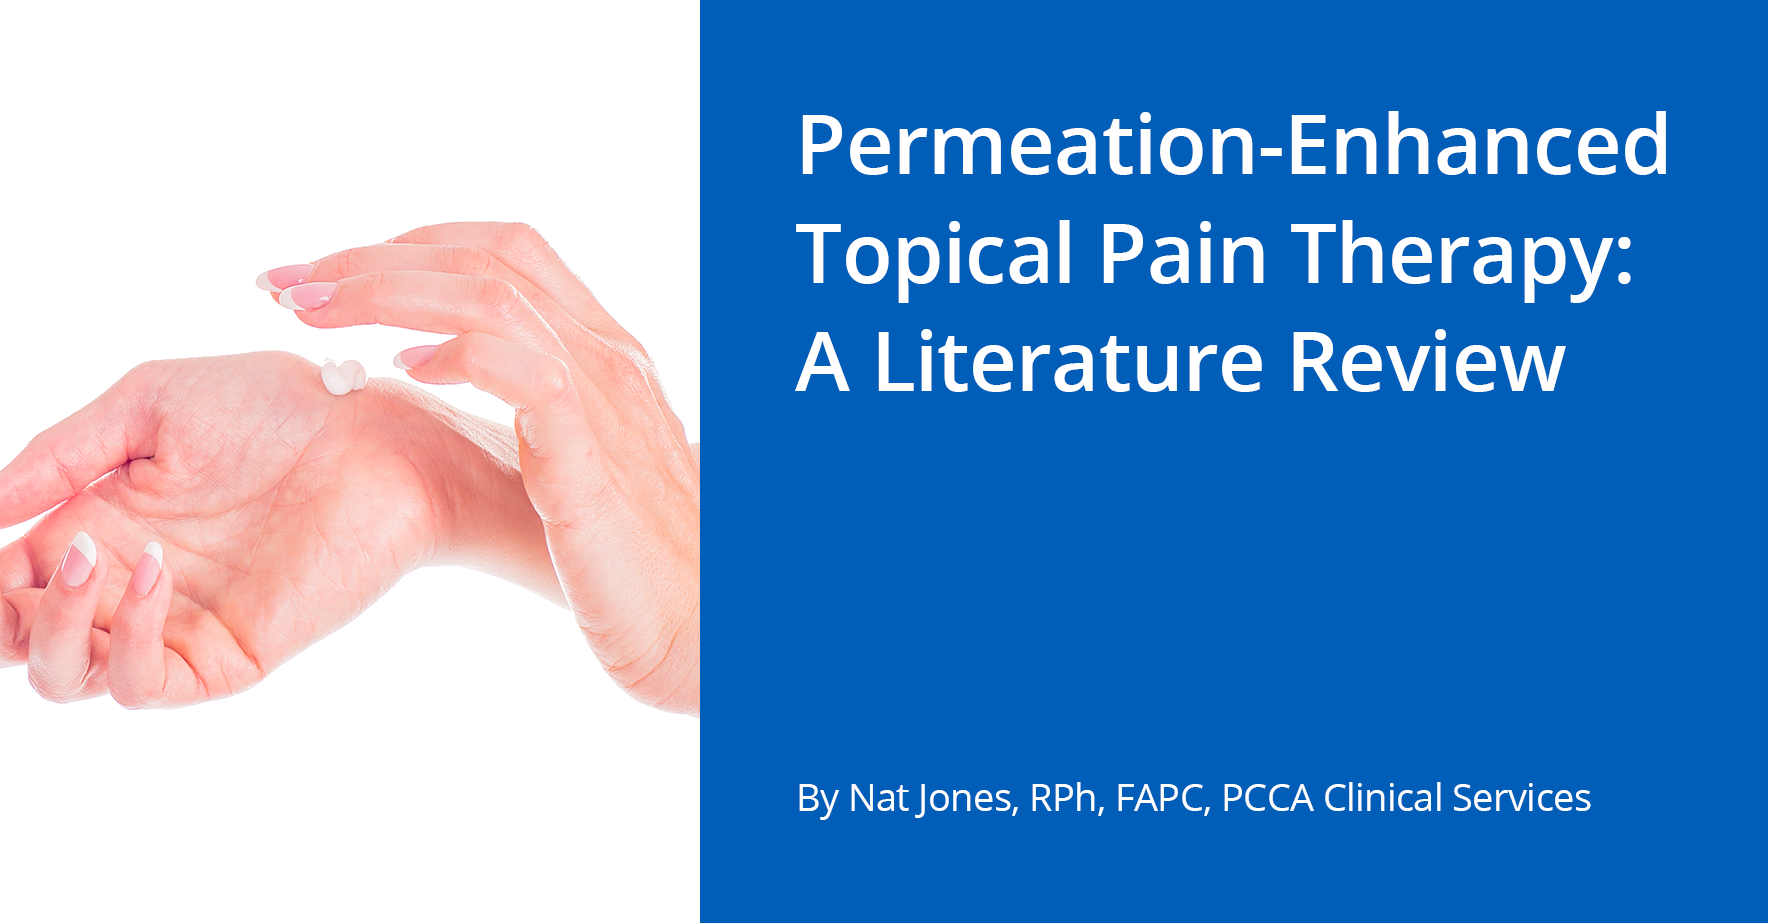 ermeation-chopcance_topical_pain_therapy_a_literature_review.png.